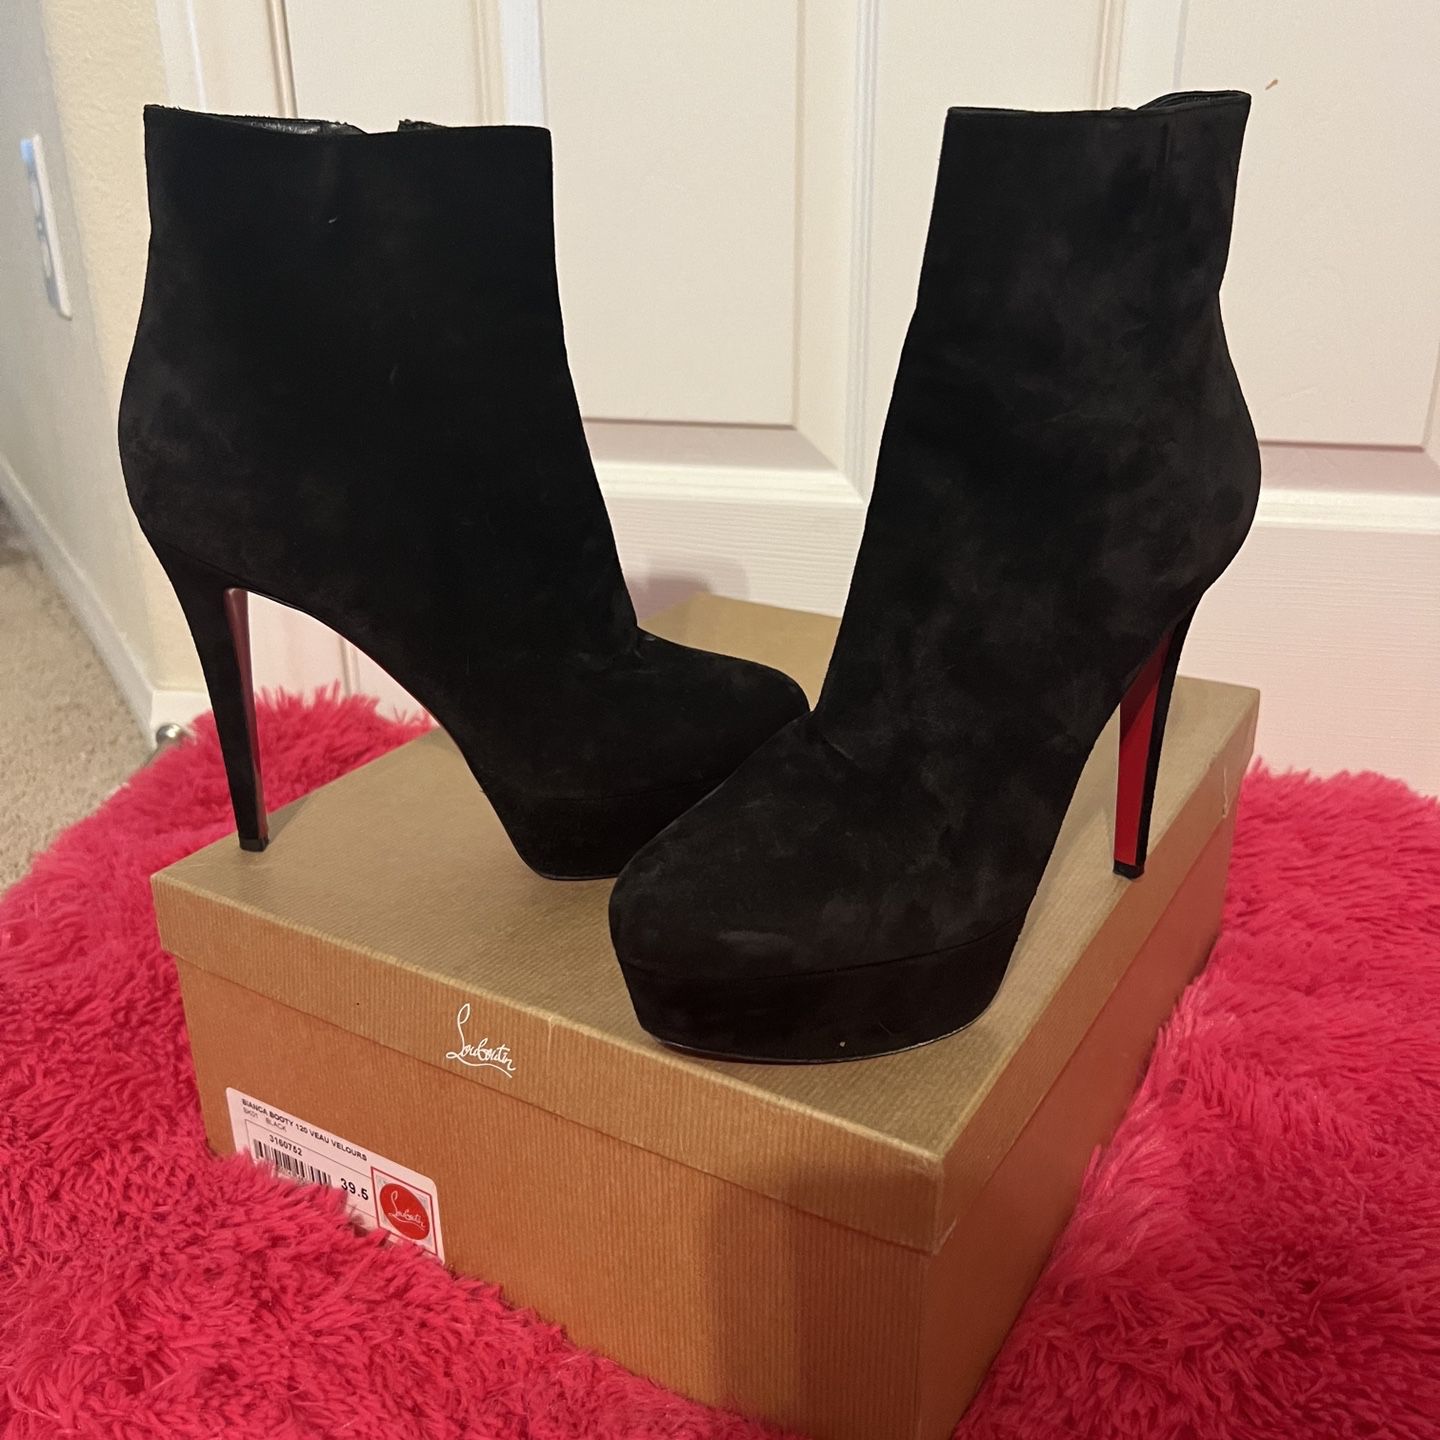 Christian Louboutin Black Heels (Authentic) for Sale in Mcallen, TX -  OfferUp